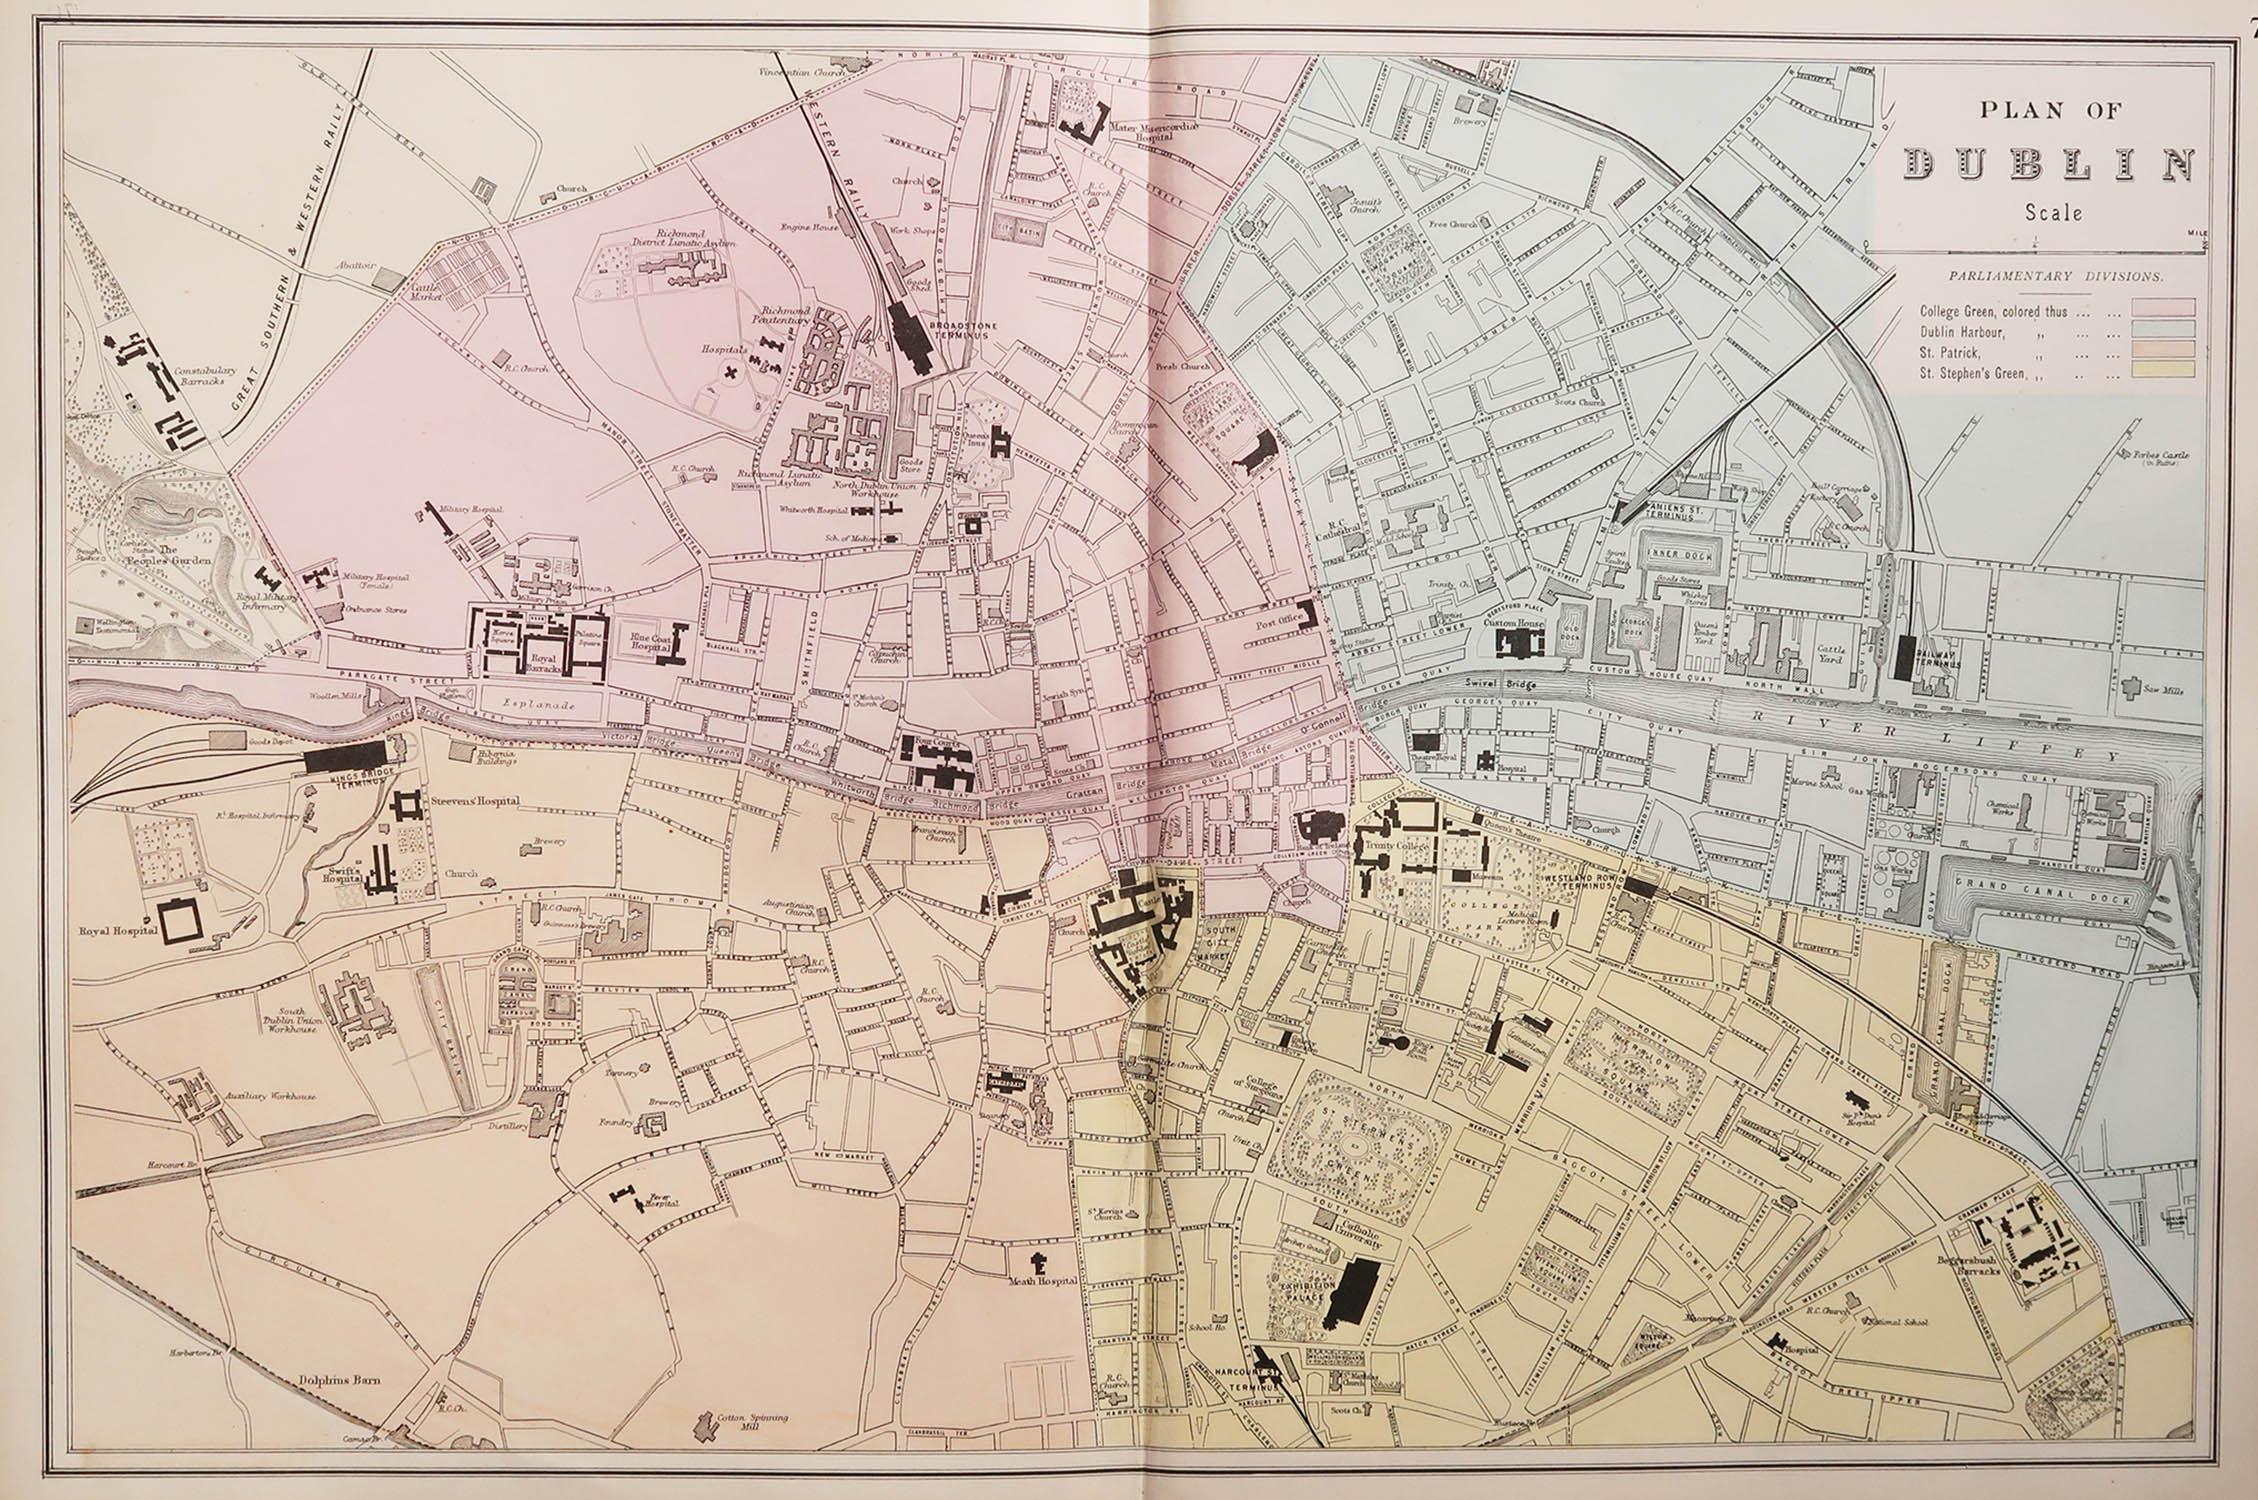 Great city plan of Dublin

Published circa 1880

Unframed

Free shipping.

.